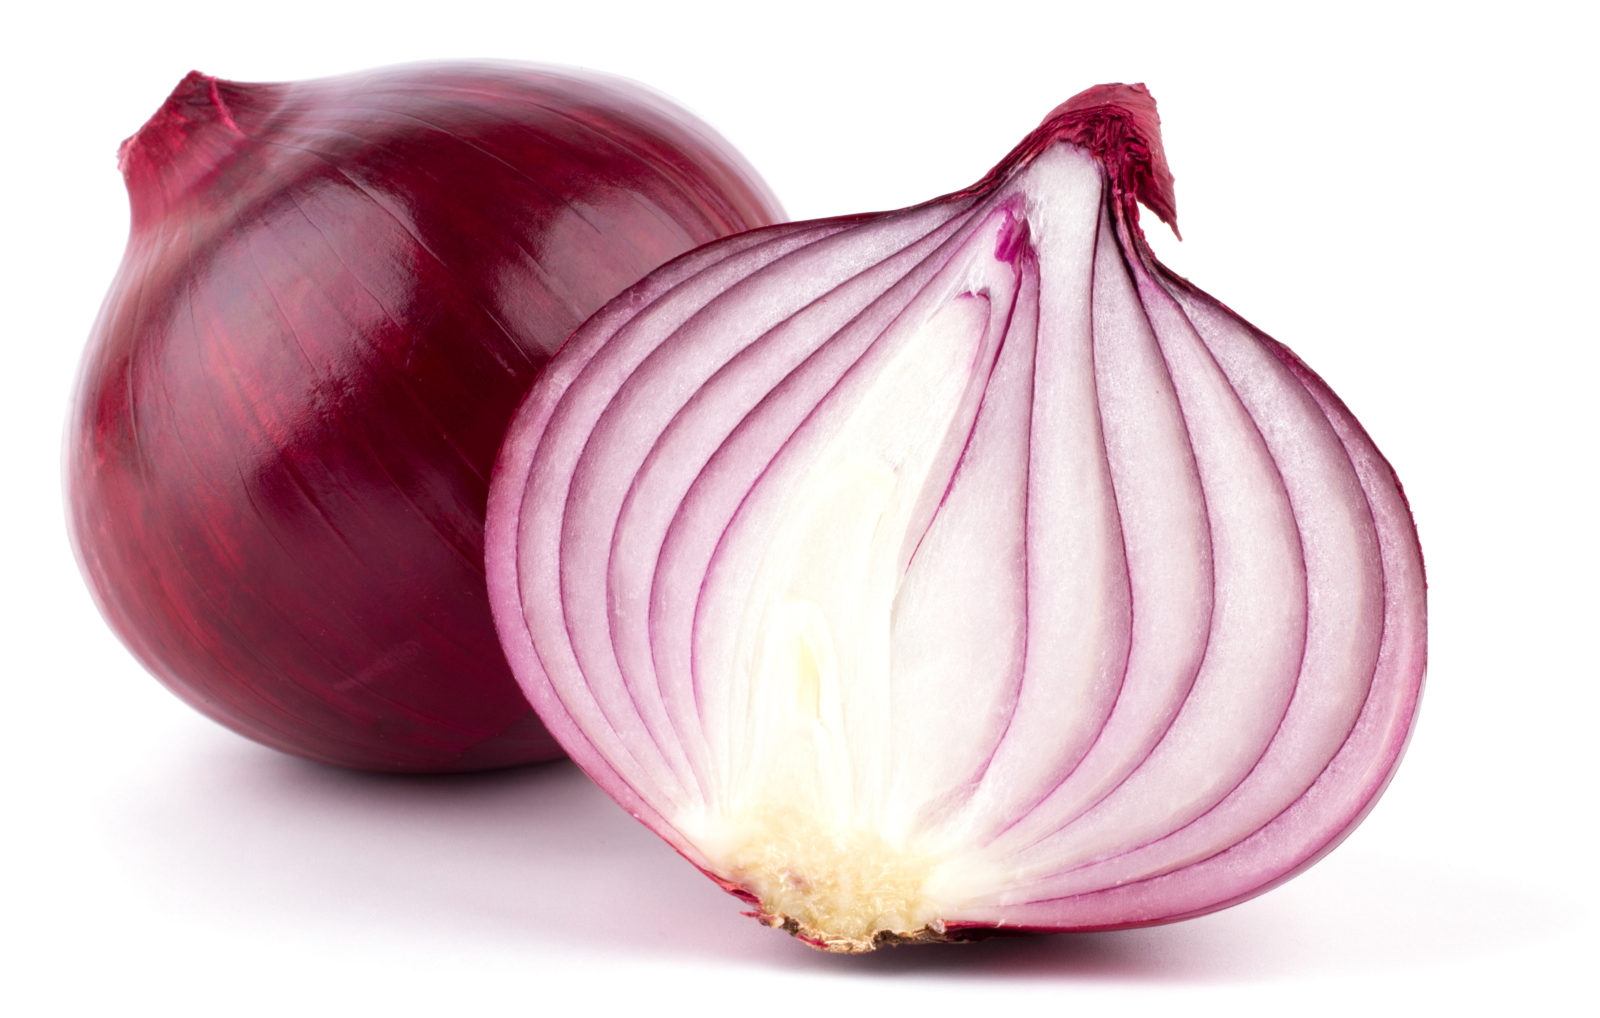 The Best Onion Sites